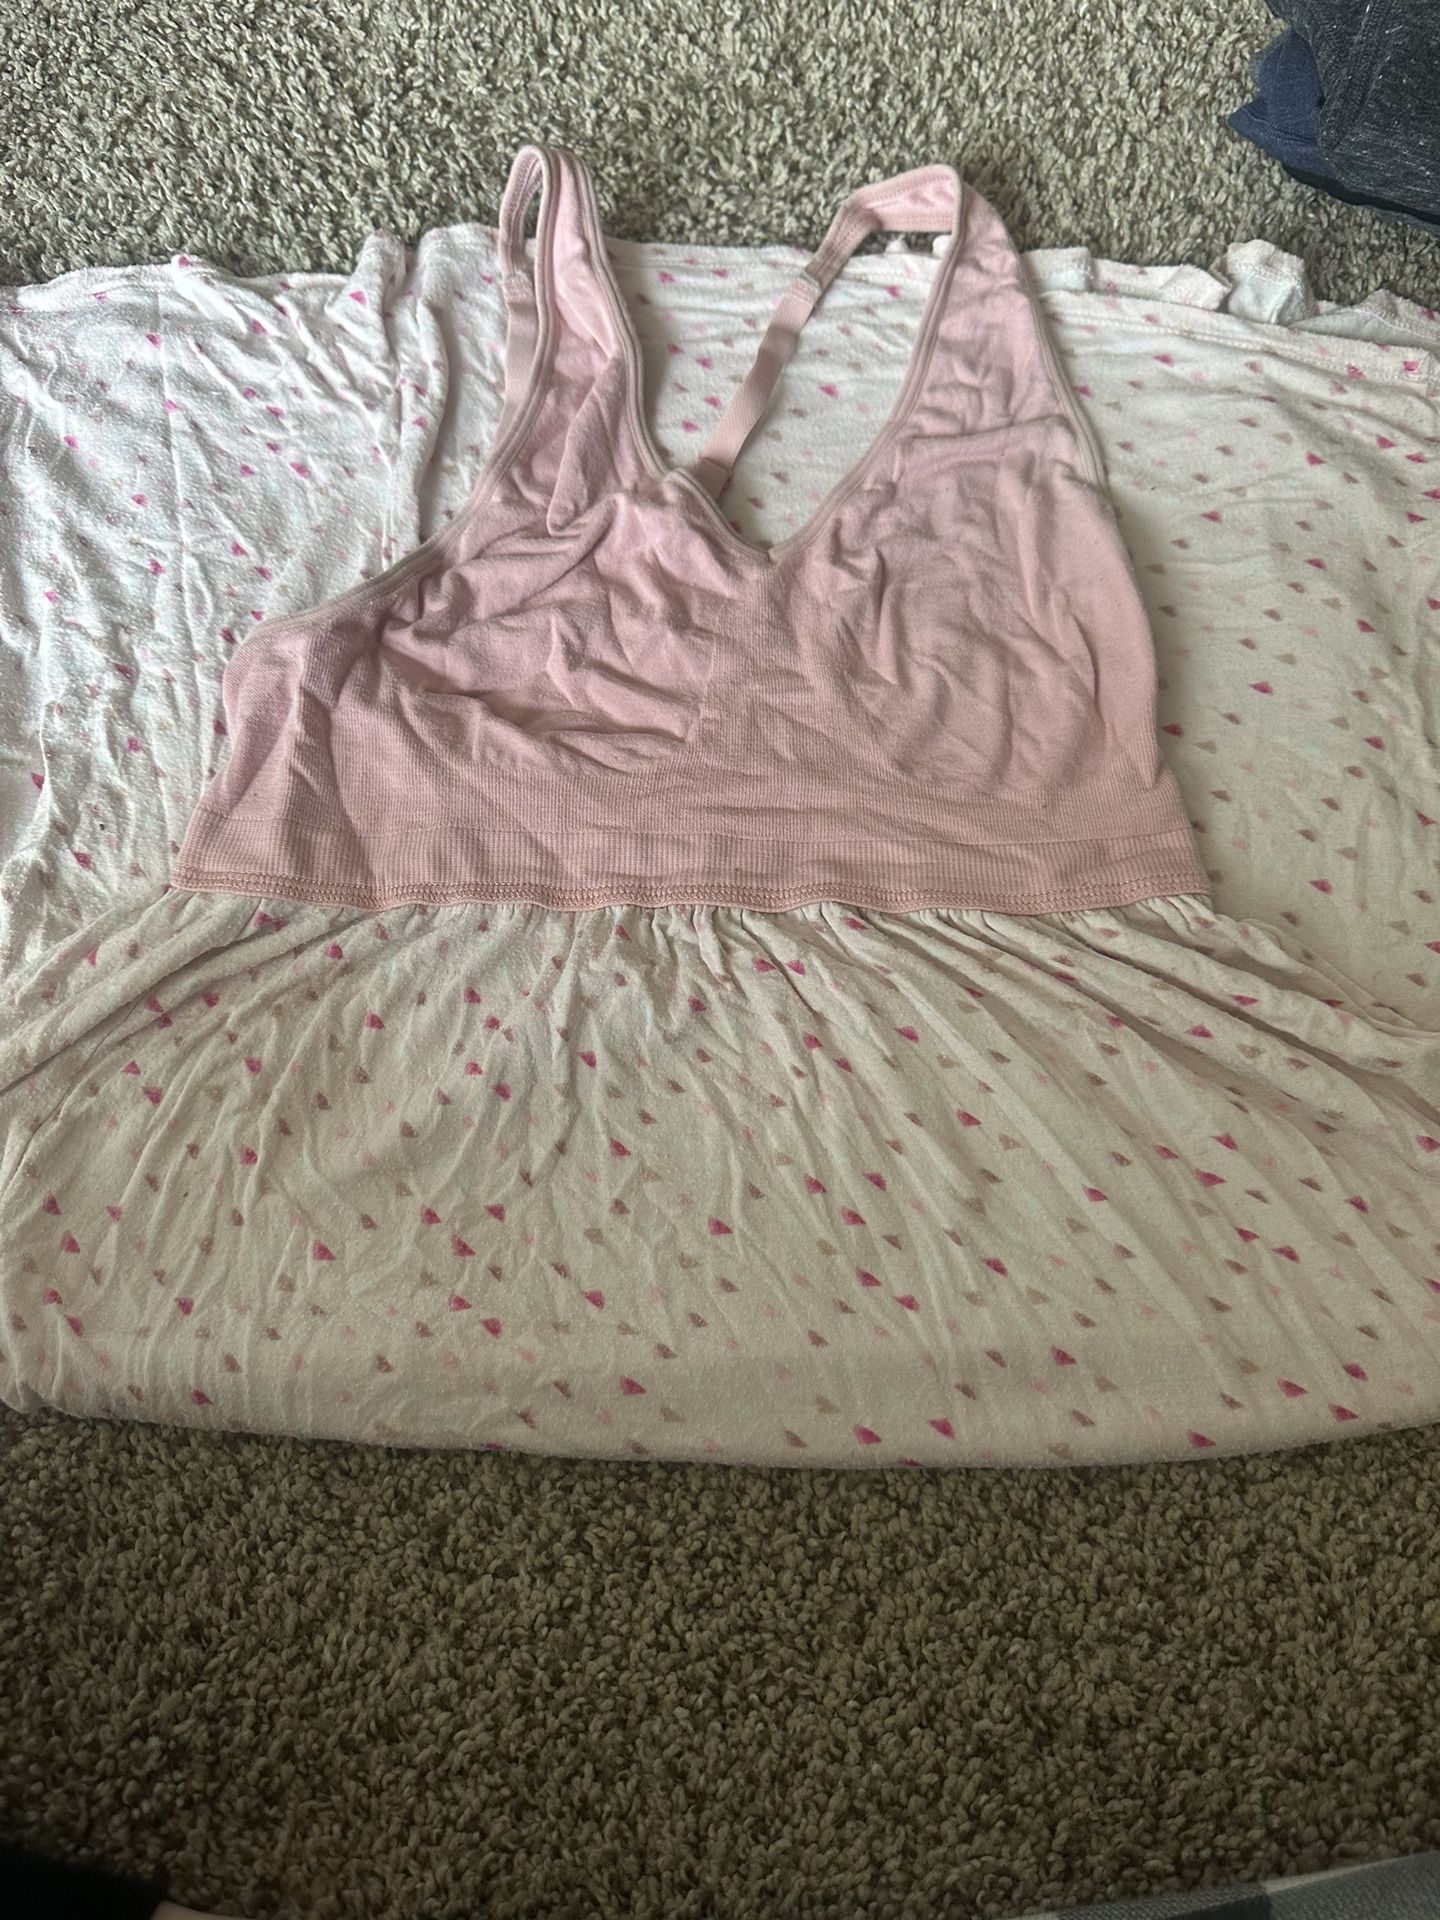 Maternity Night Gowns And Robes Size M